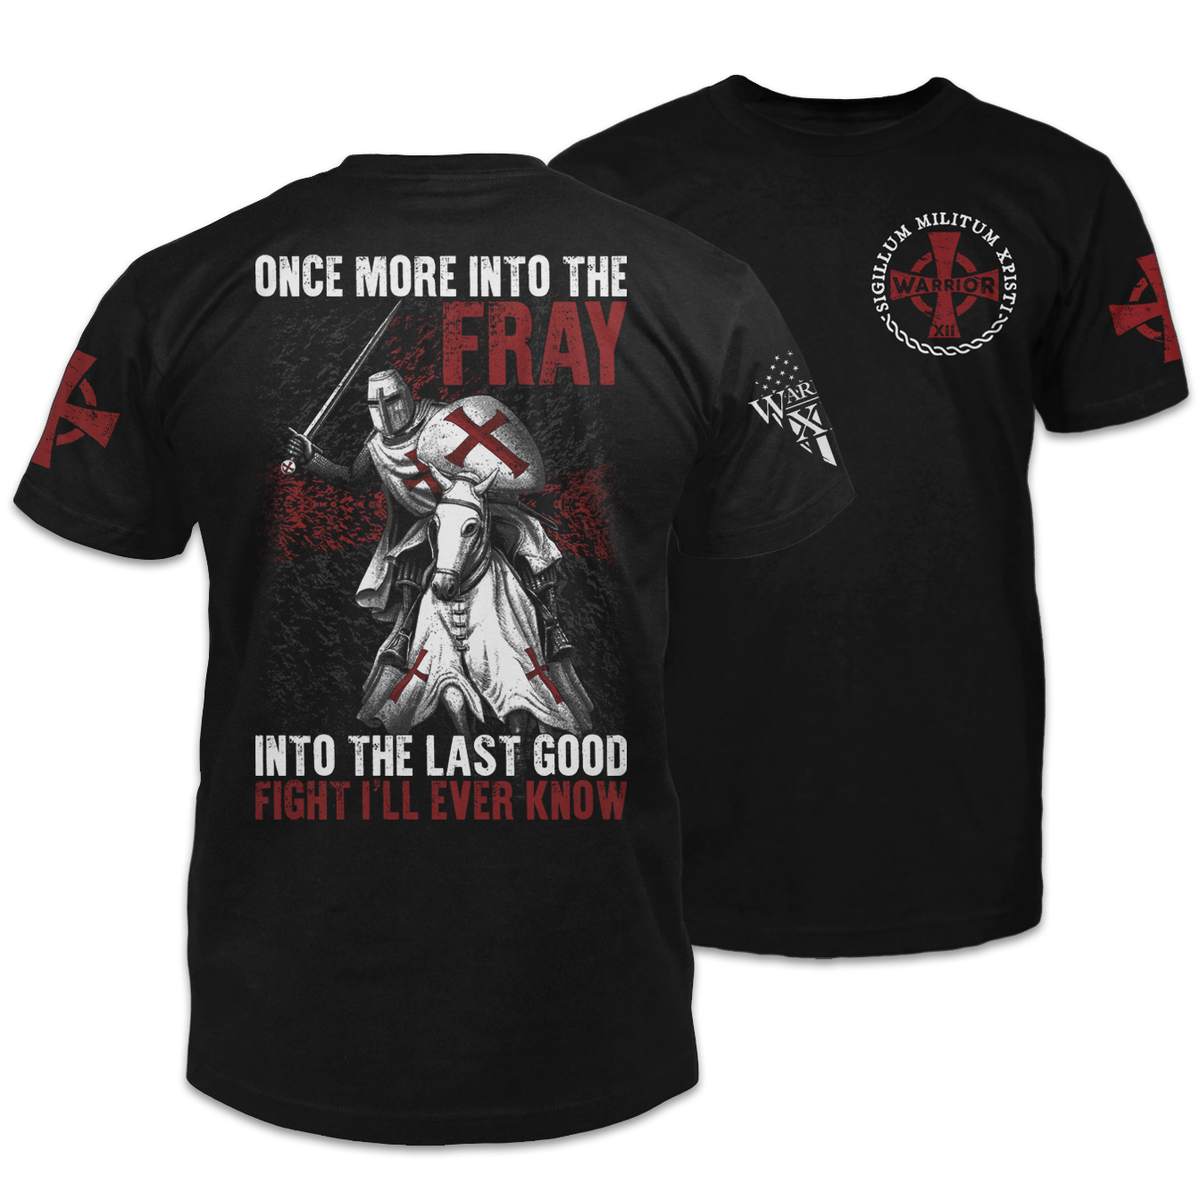 Front & back black t-shirt with the words "Once more into the fray, into the last good fight I'll ever know" with a knights templar ready for battle printed on the shirt.